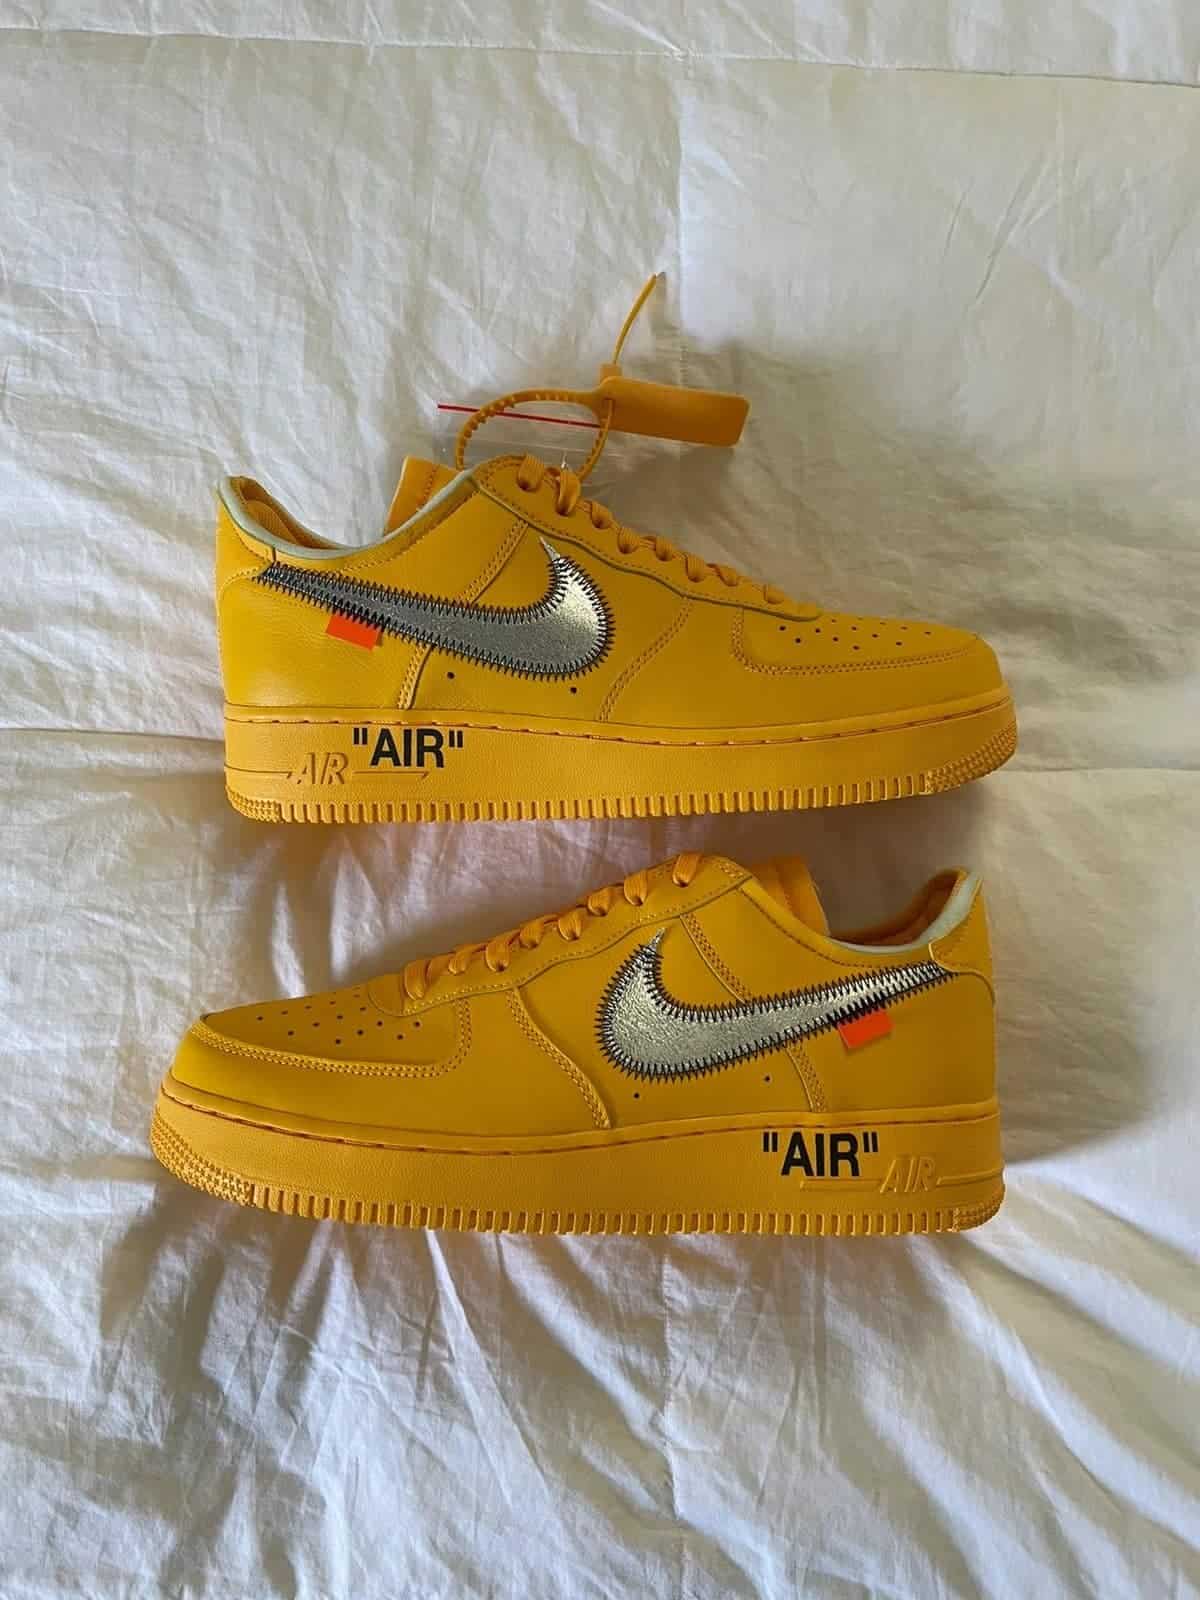 Nike X Air Force 1 University Gold Fake Vs Real Guide - OW AF1 - Legit Check By Ch